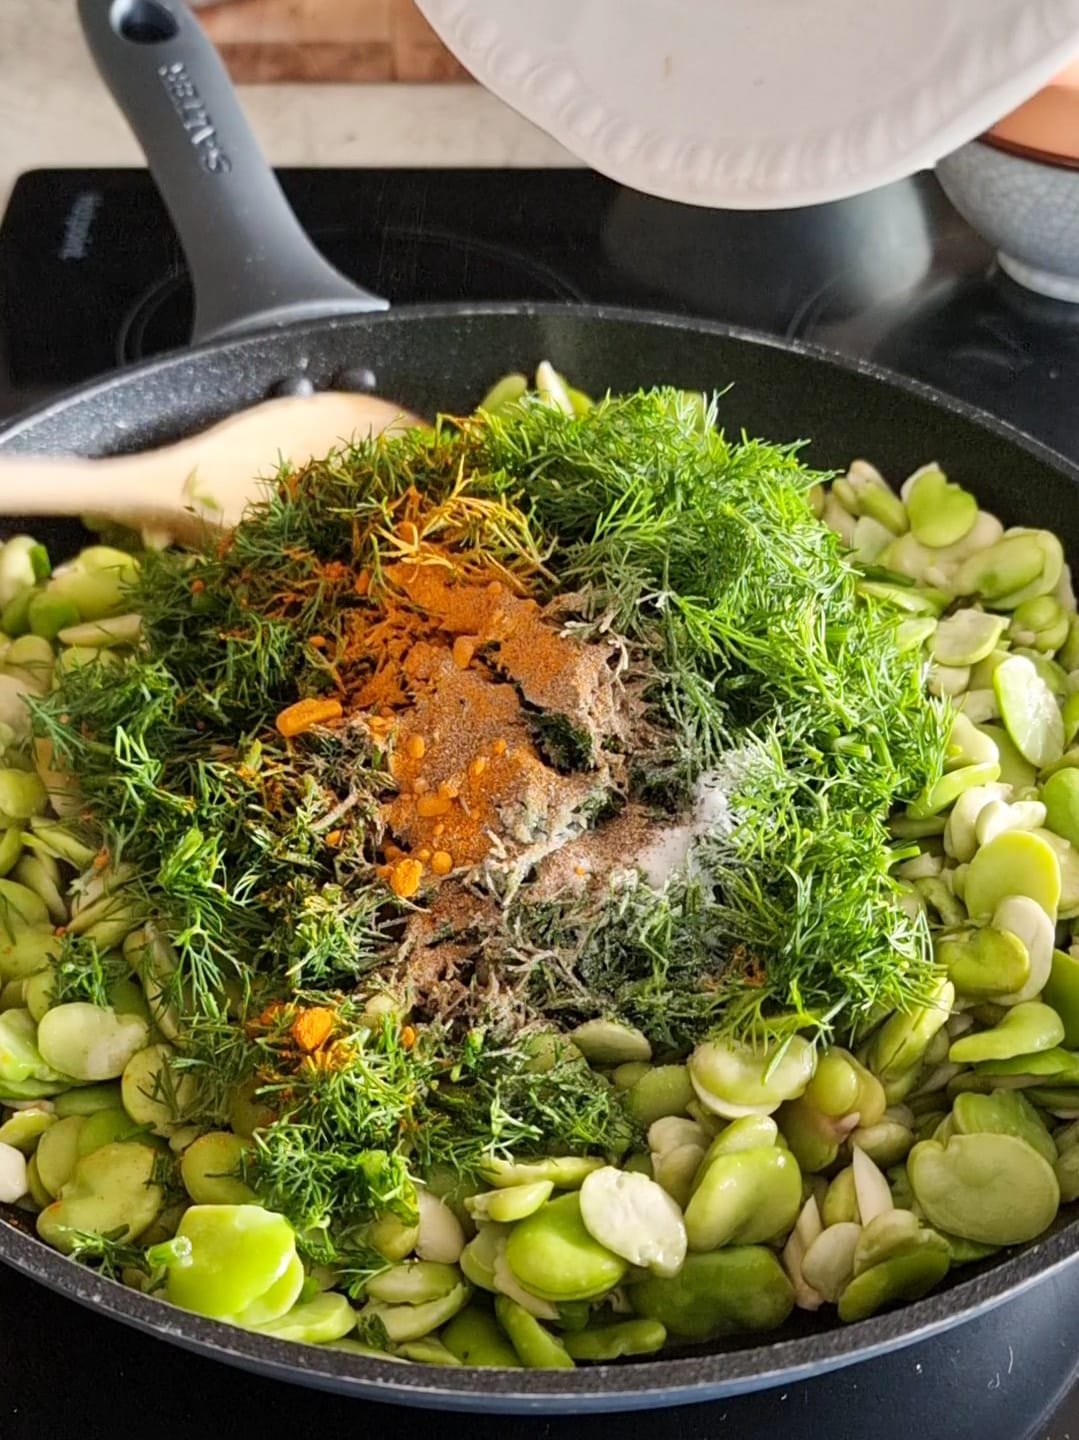 Add the black pepper, turmeric and salt to the dill and garlic.